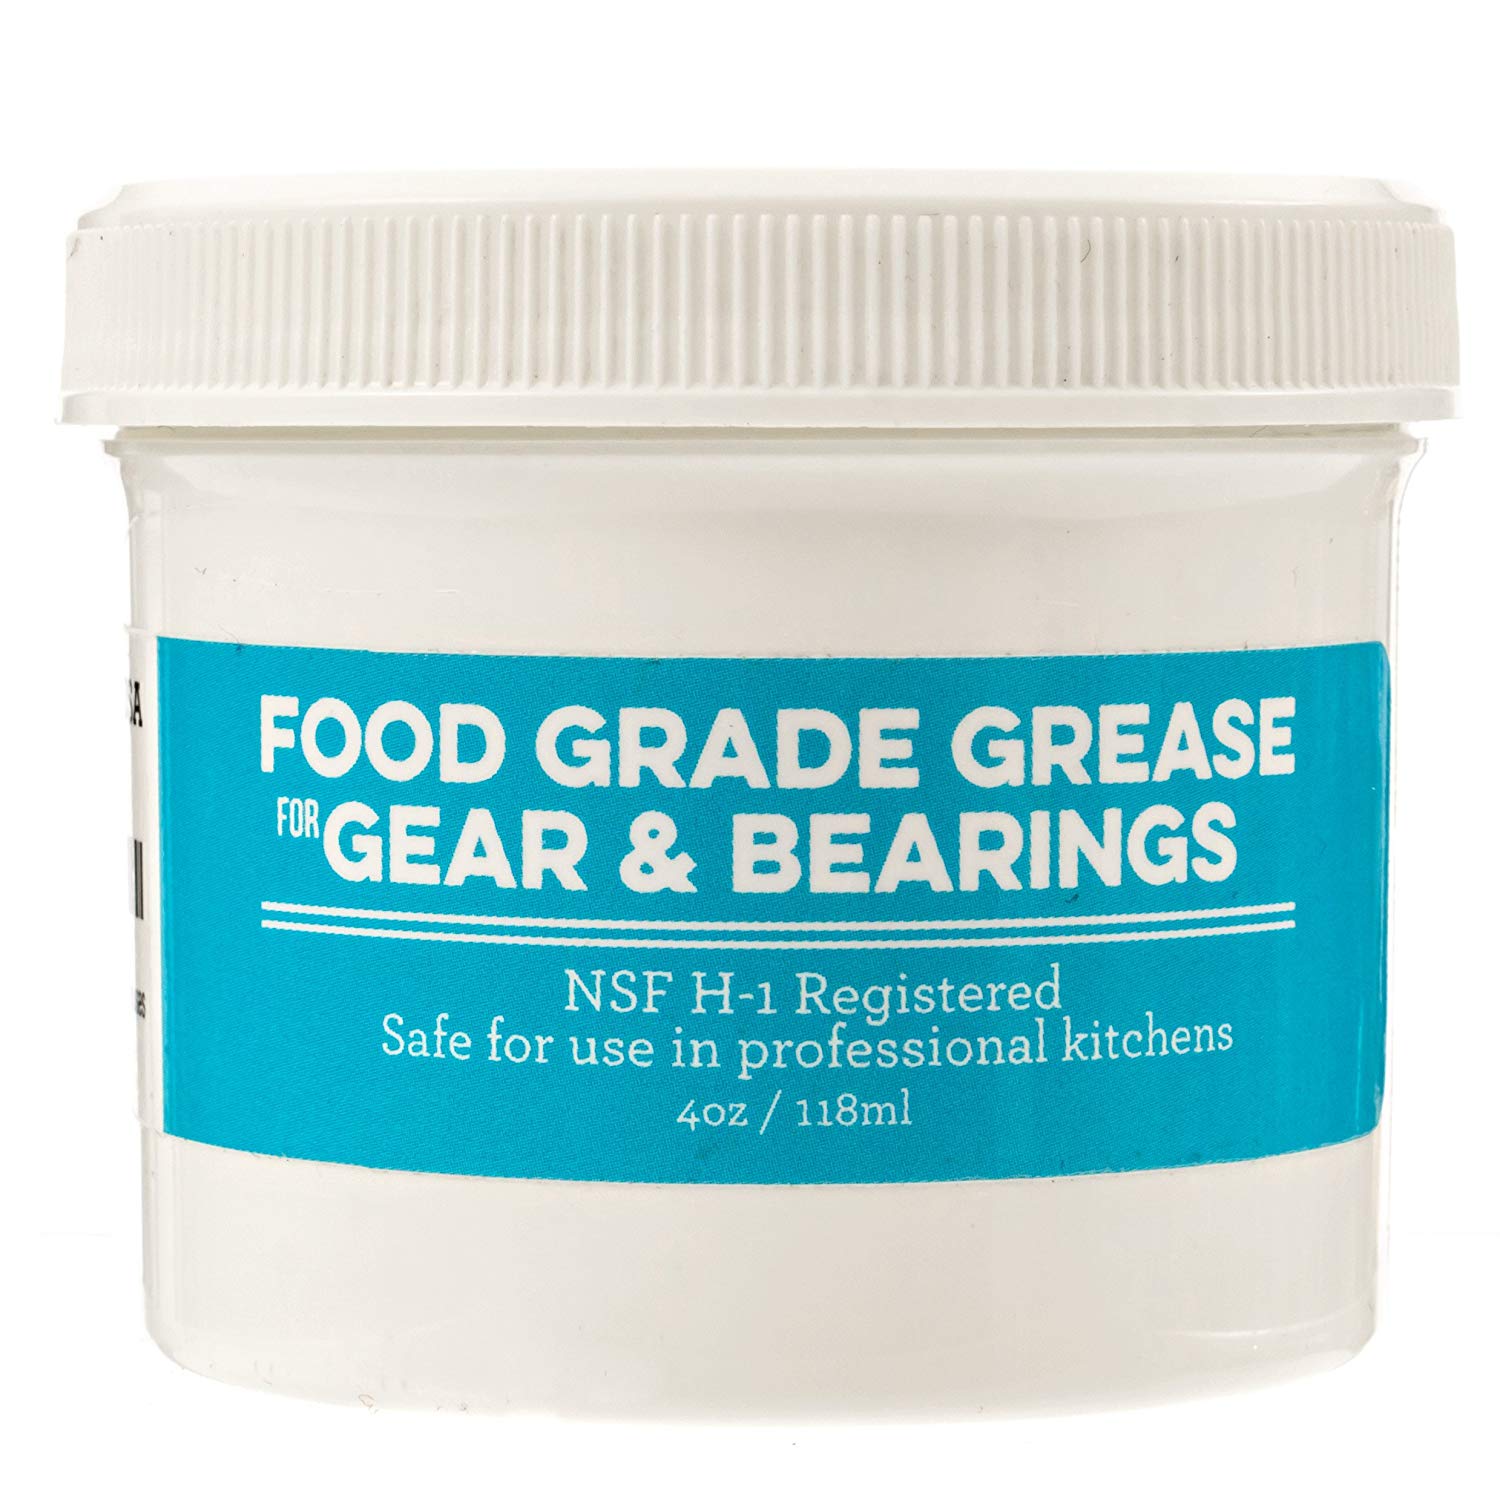 4 Oz Food Grade Grease for Kitchen Aid Stand Mixer - image 3 of 8